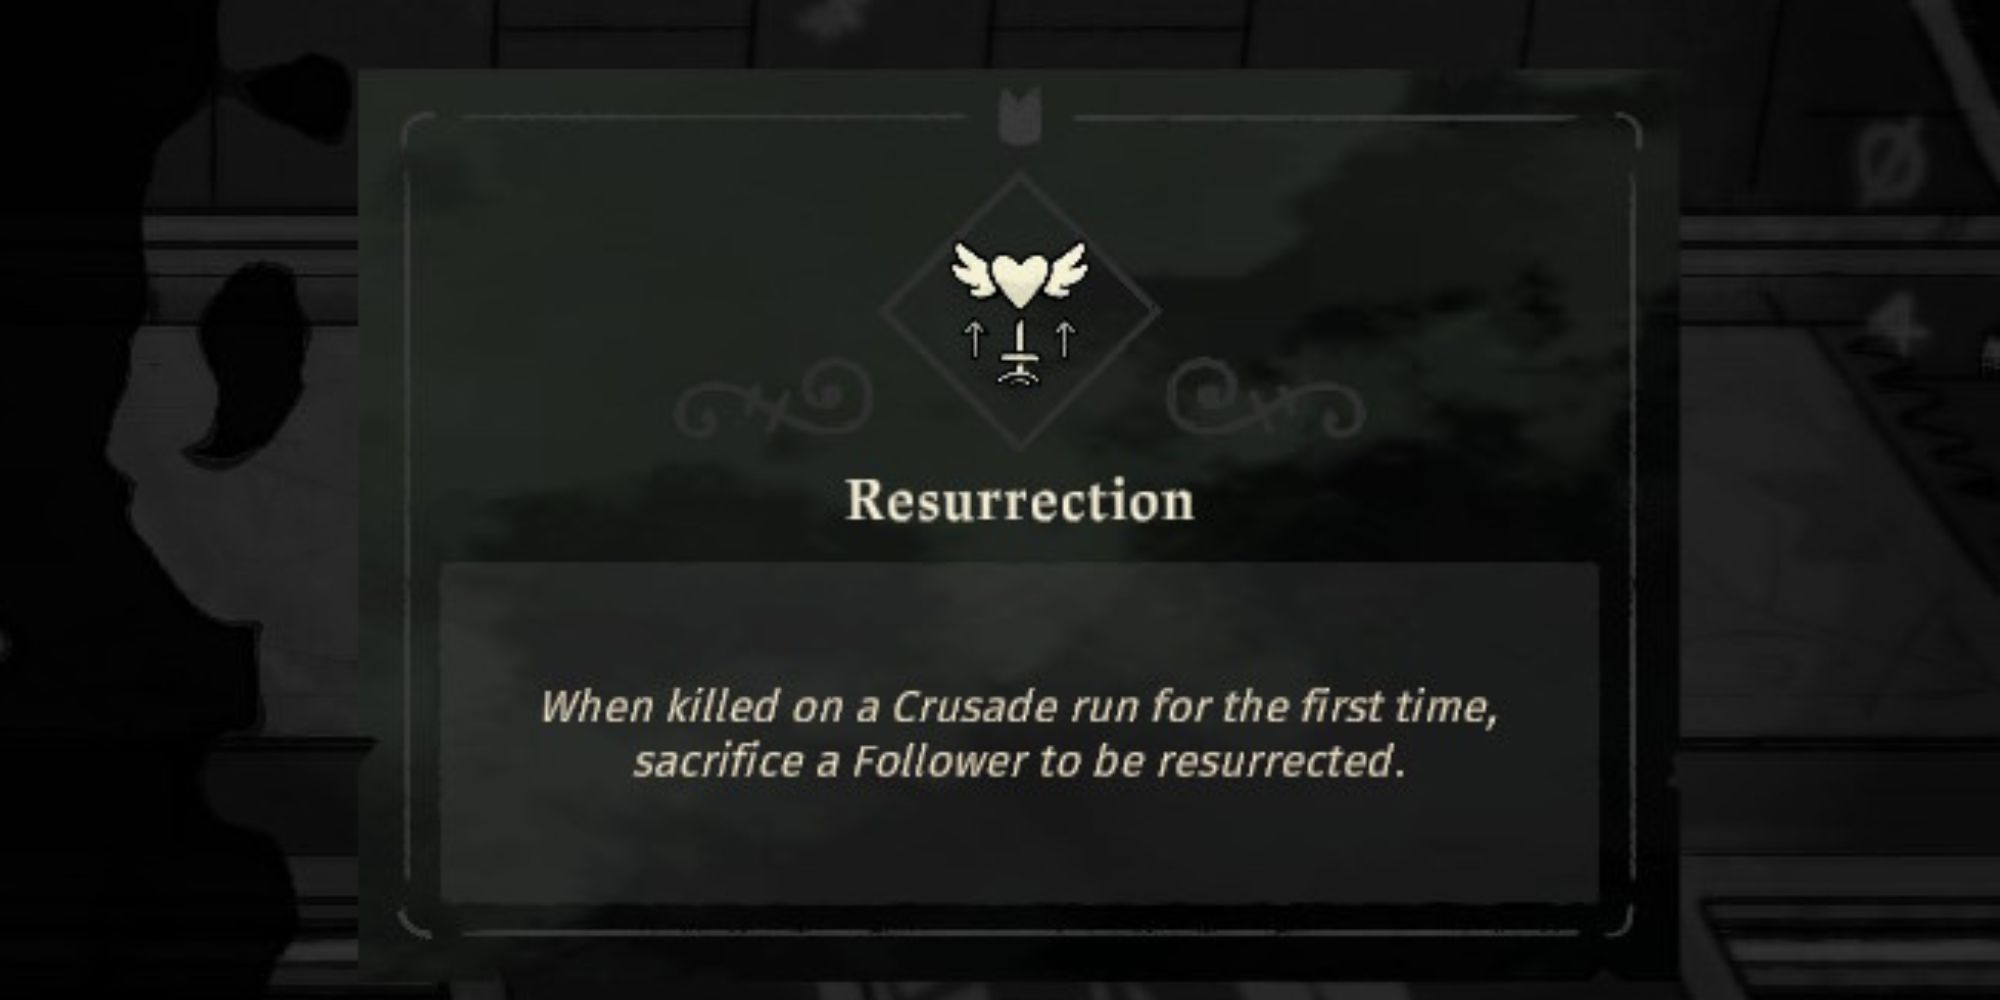 The Resurrection upgrade in Cult of the Lamb